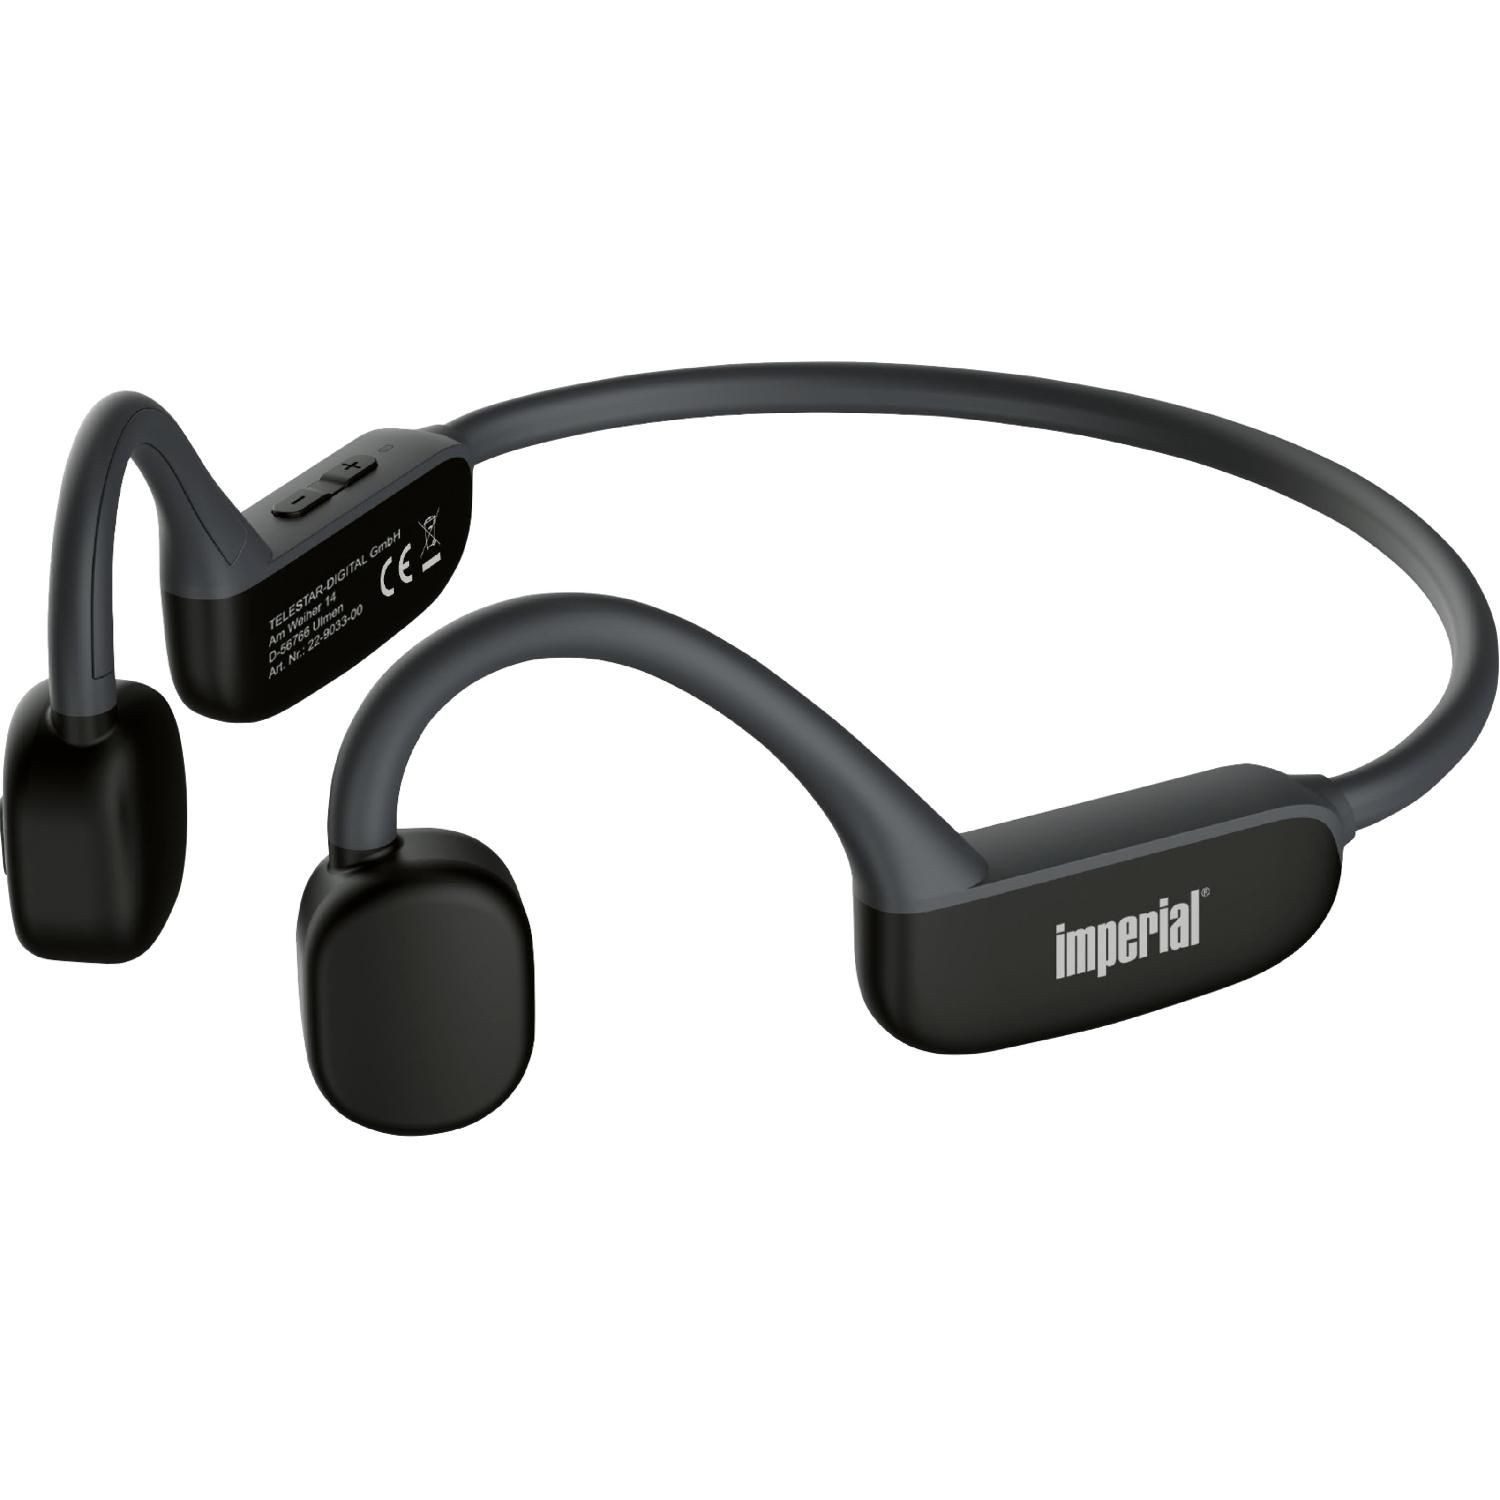 IMPERIAL by TELESTAR bluTC active 1 Knochenschall-Kopfhörer Bluetooth 5.3 Akku Kopfhörer (Bluetooth, kabellos)